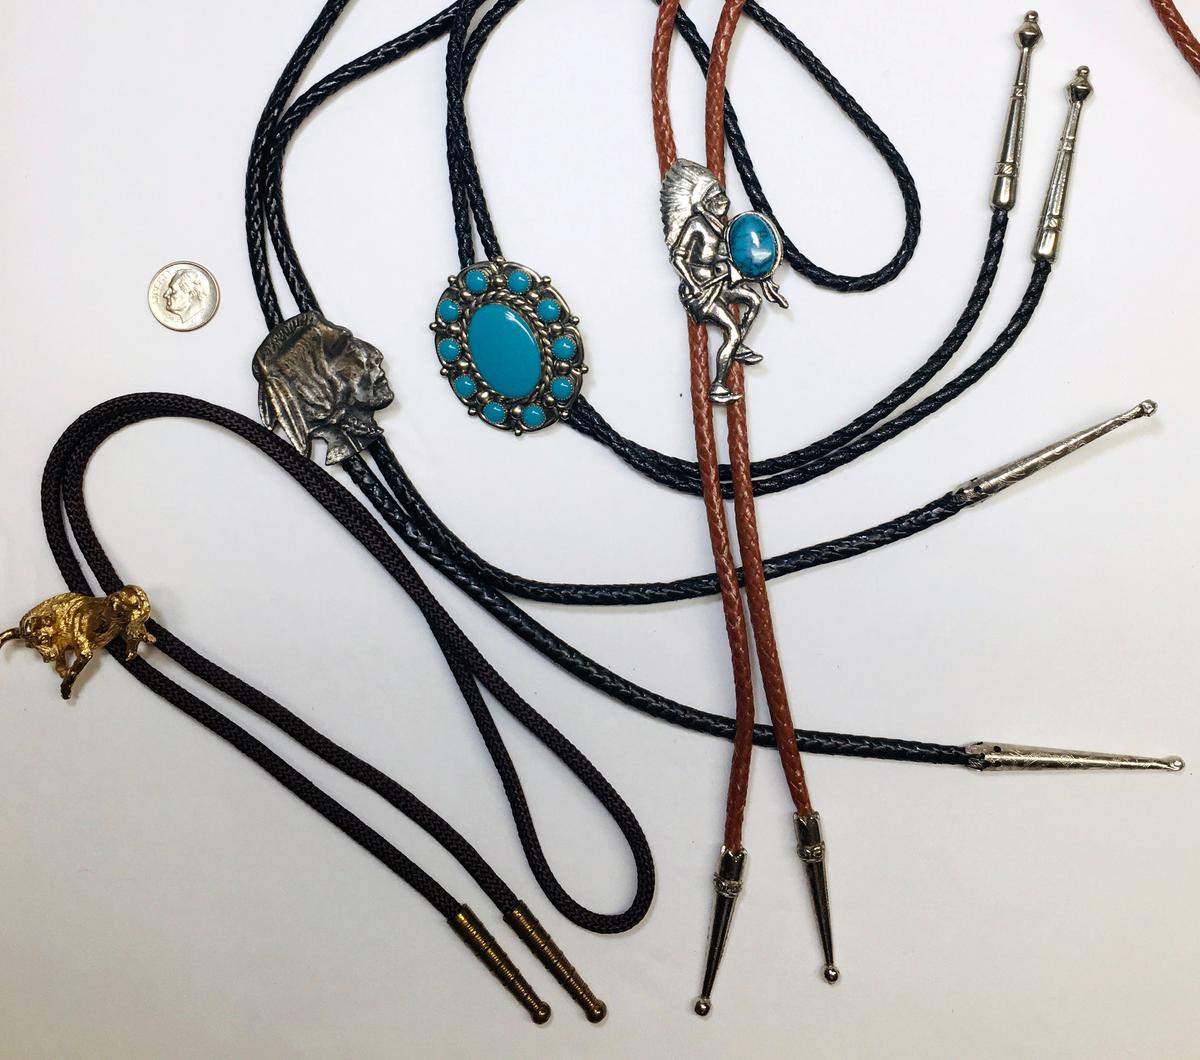 4 Vintage BOLO TIES. They are coming back in style again.